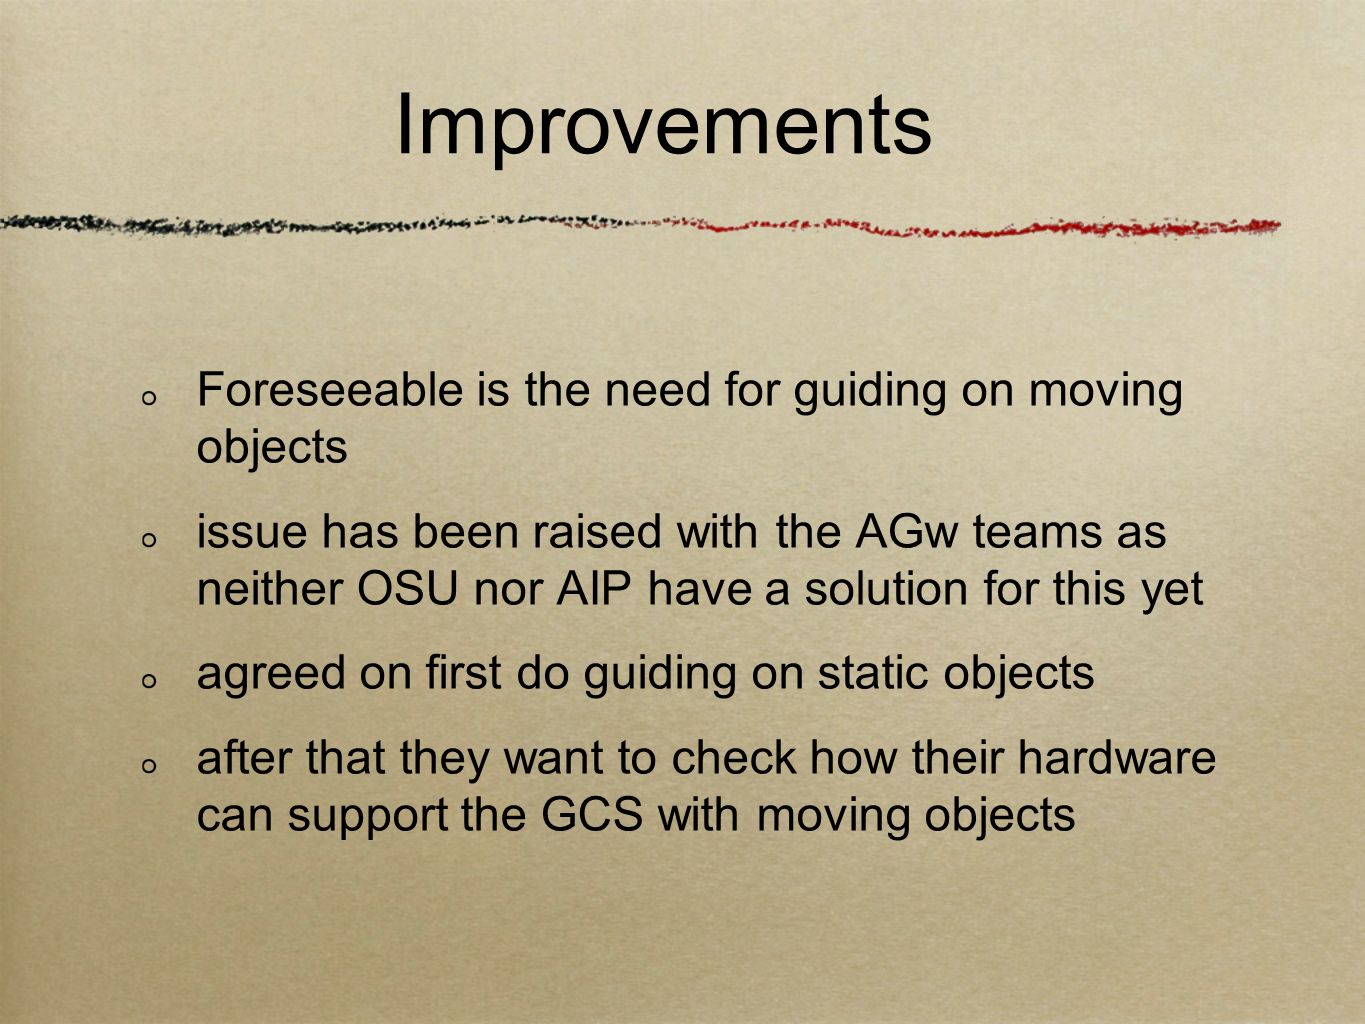 Improvements Foreseeable is the need for guiding on moving objects issue has been raised with the AGw teams as neither OSU nor AIP have a solution for this yet agreed on first do guiding on static objects after that they want to check how their hardware can support the GCS with moving objects